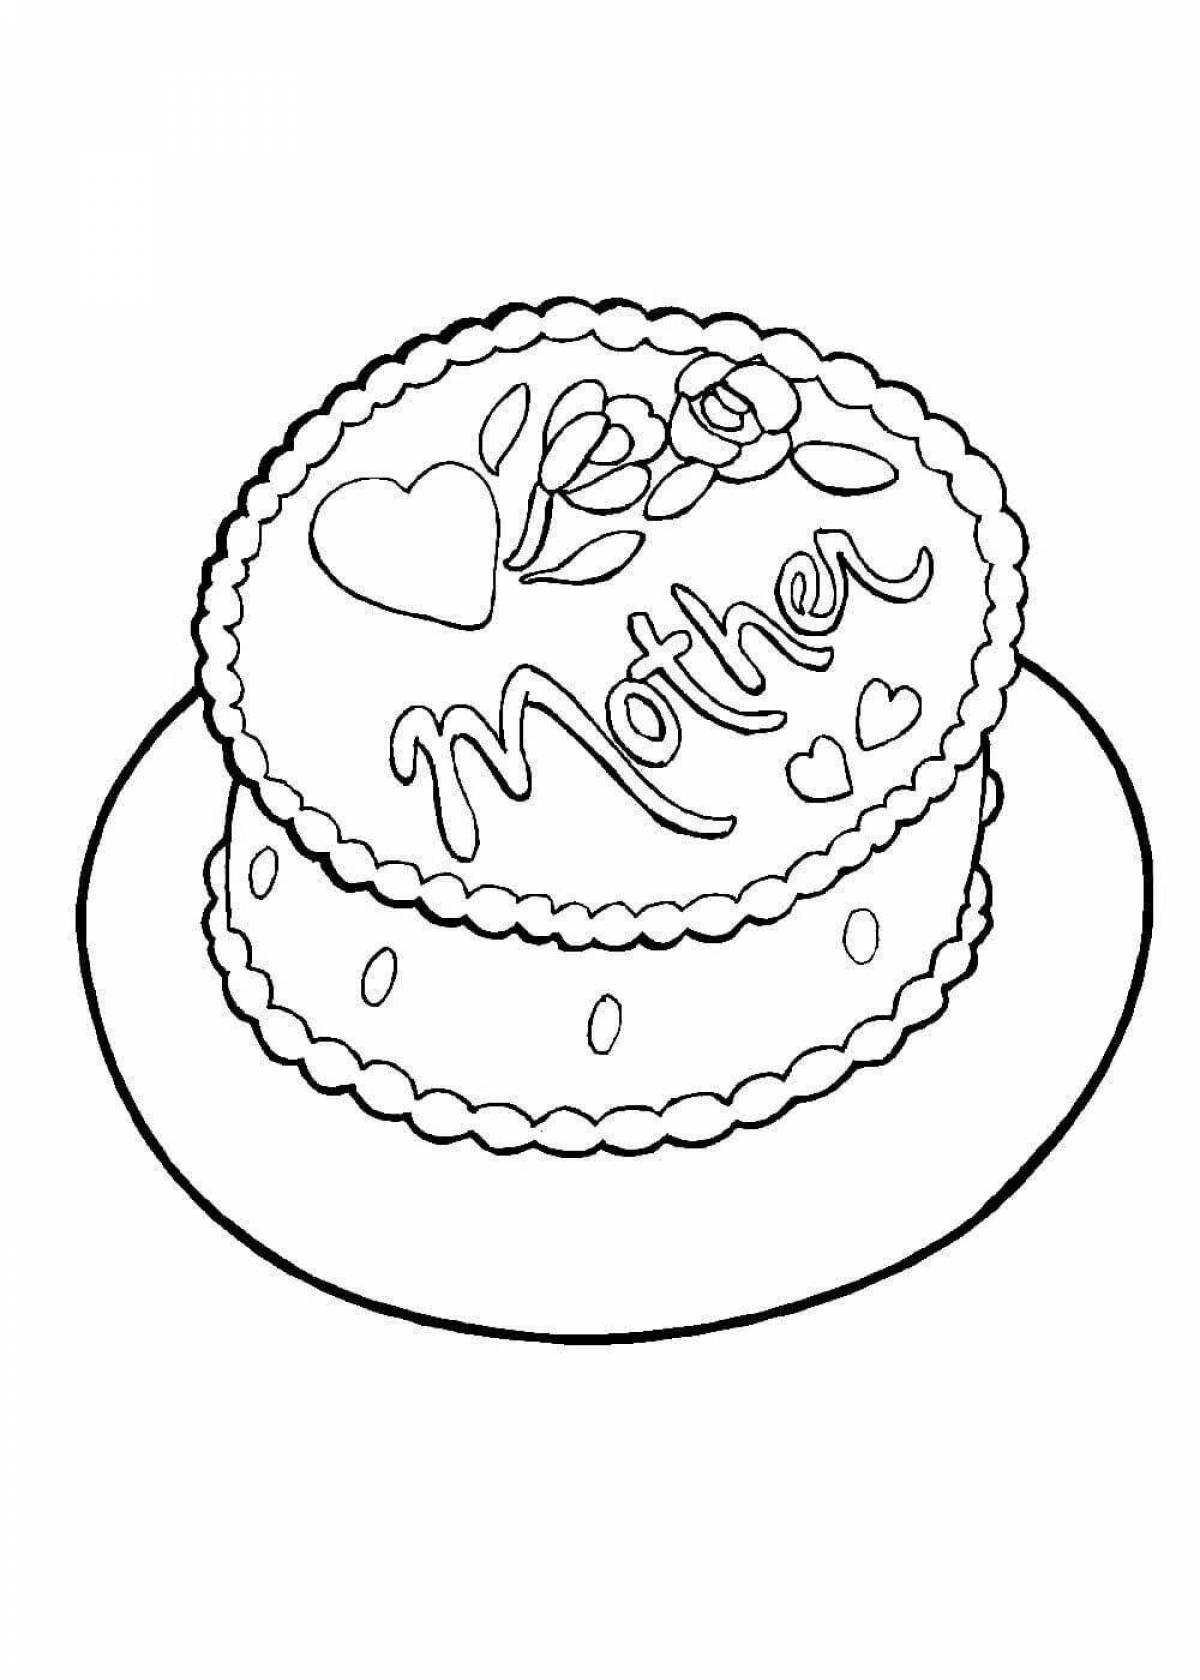 Exquisite beautiful cake coloring page